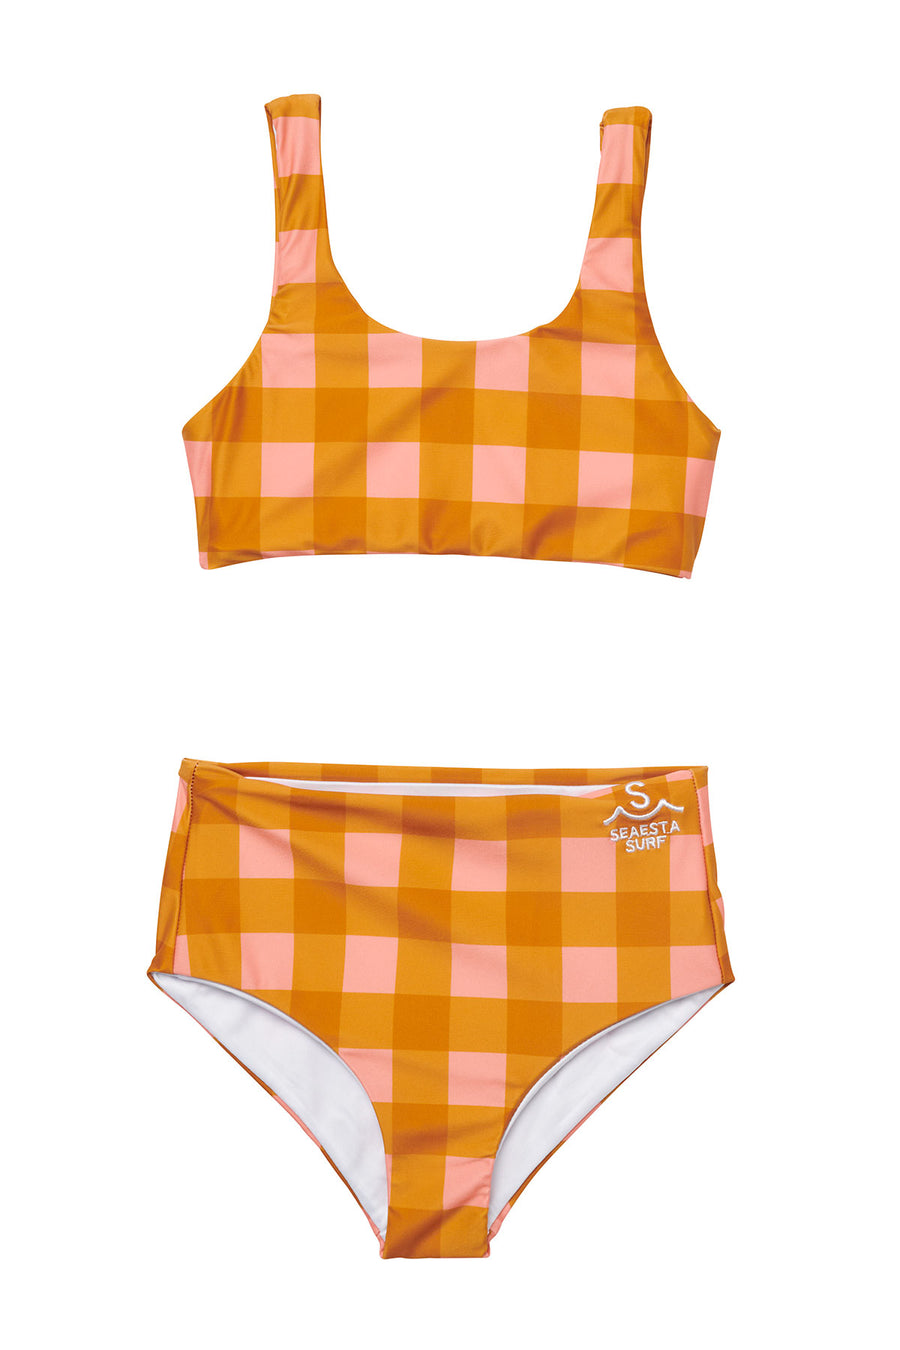 Seaside Gingham / Two Piece Swimsuit